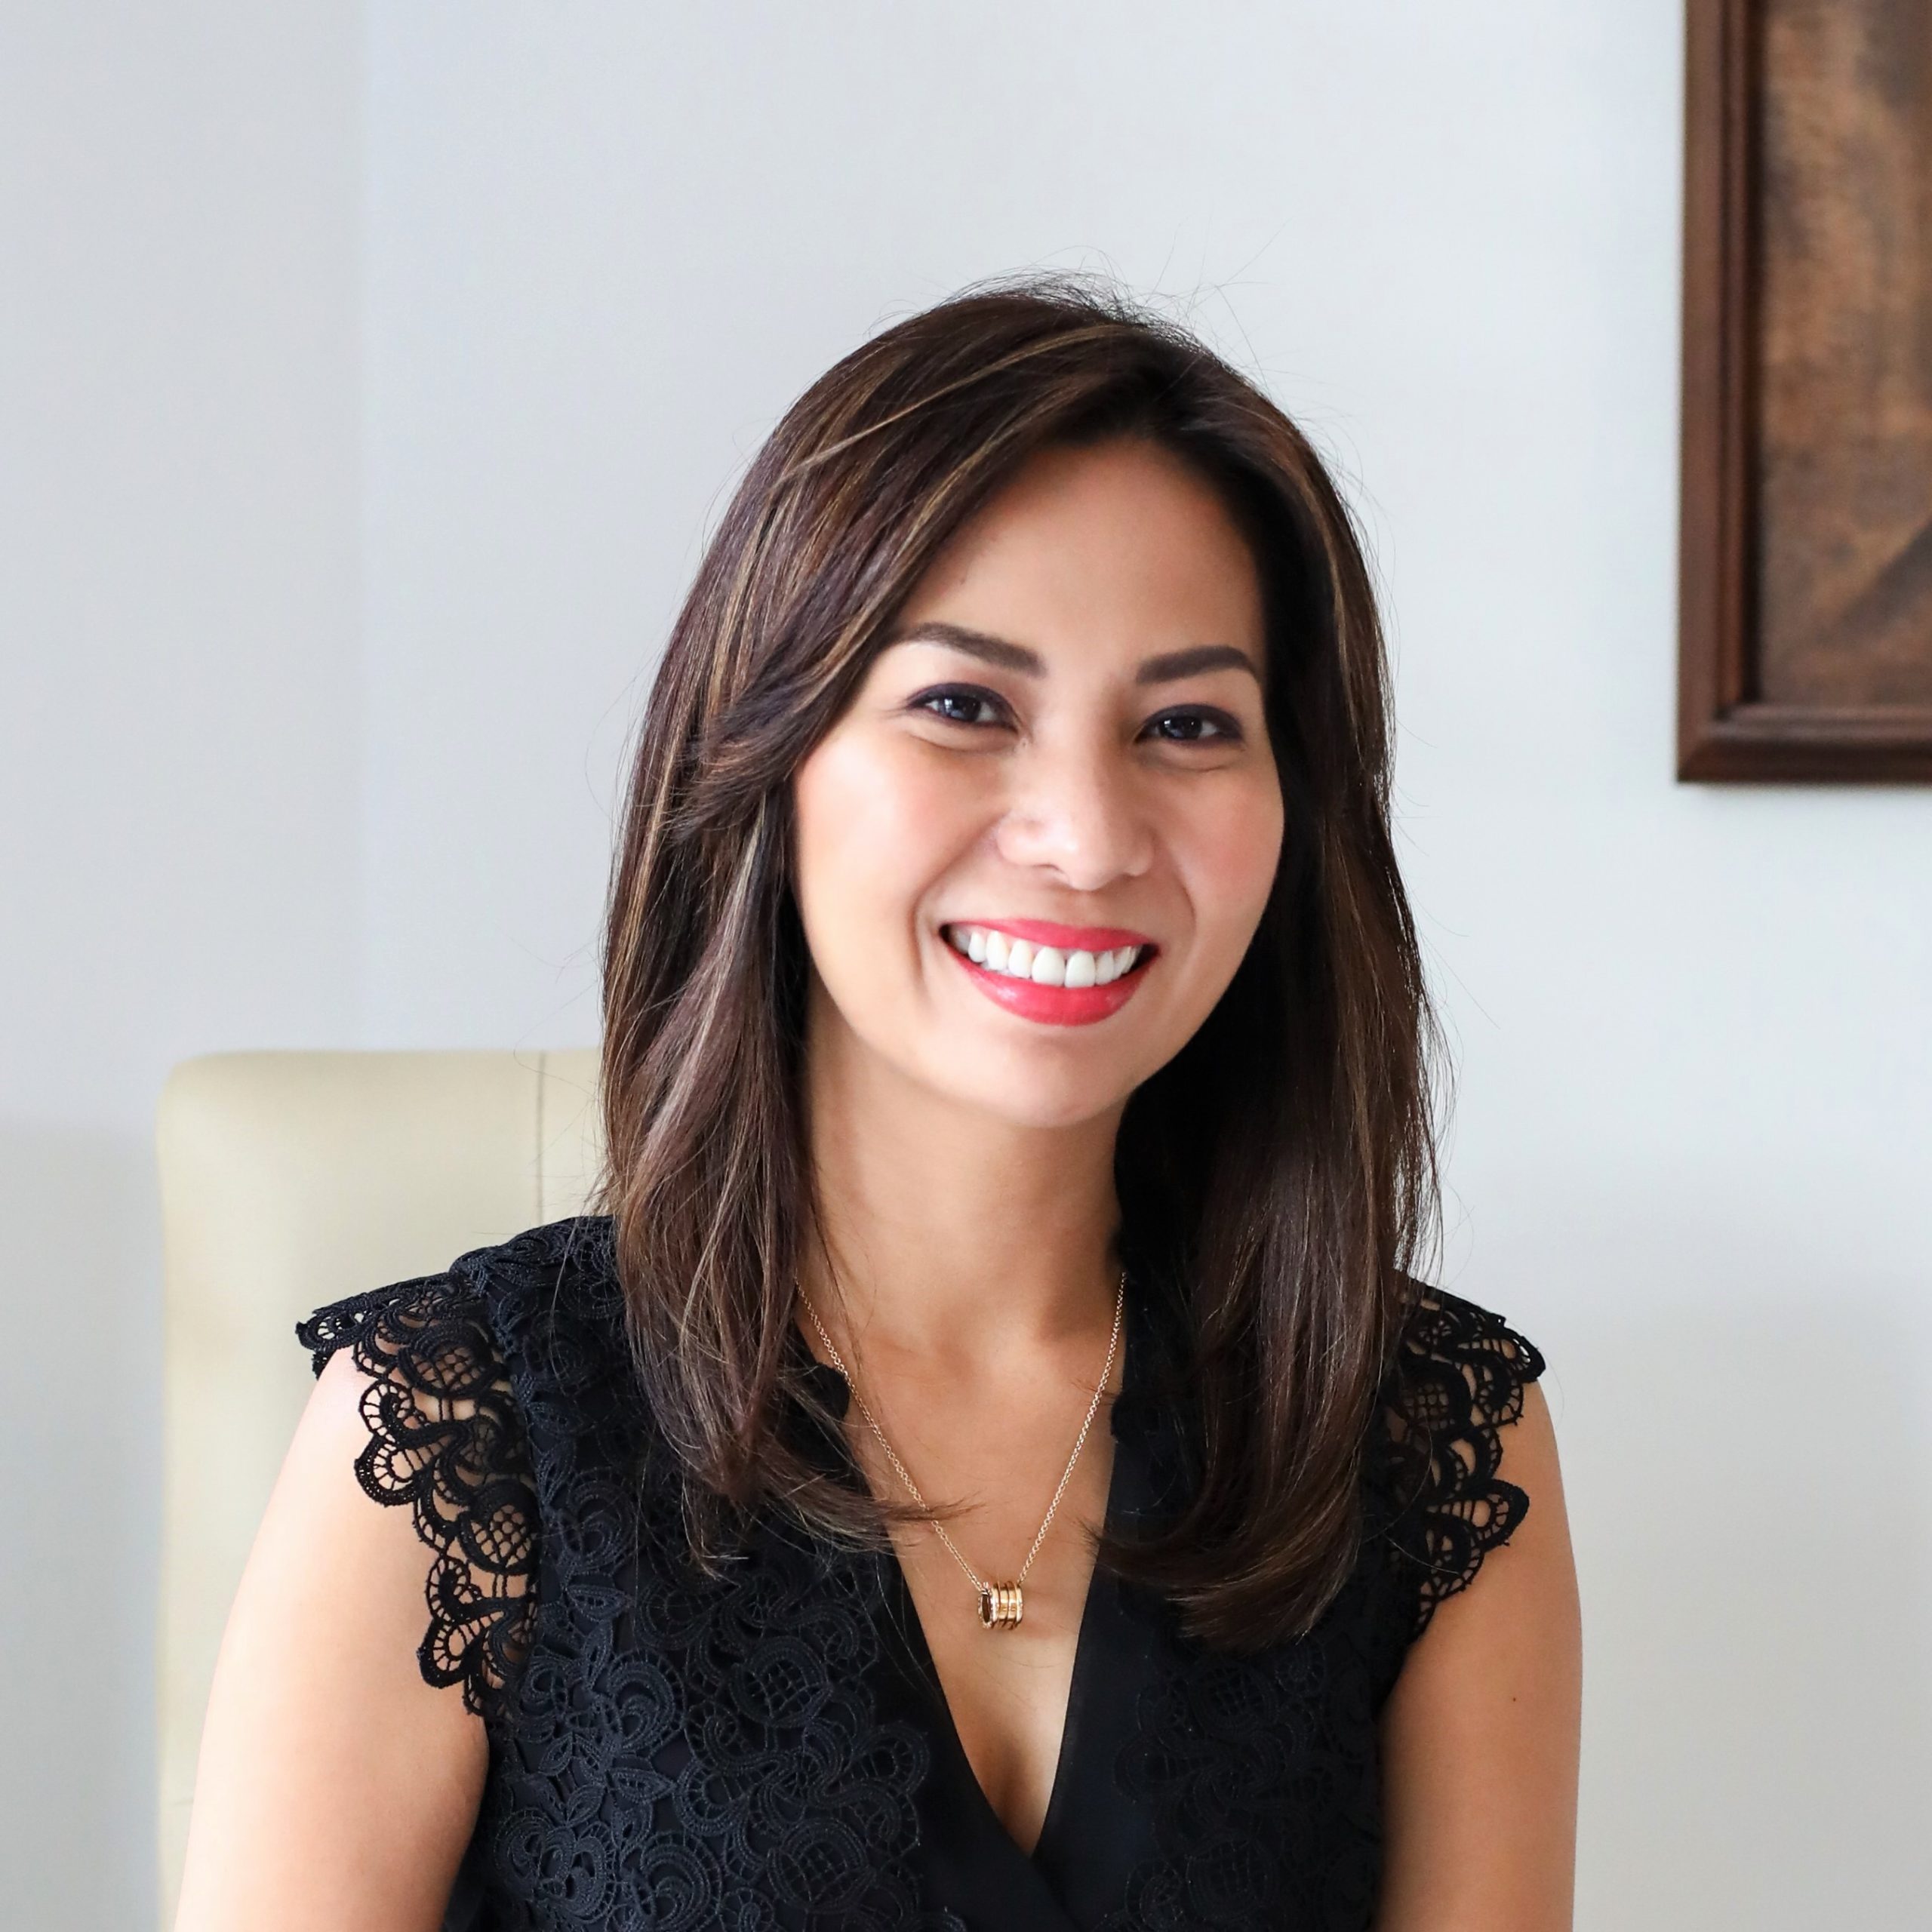 Filipino Woman Smiling Real Estate Investment Expert